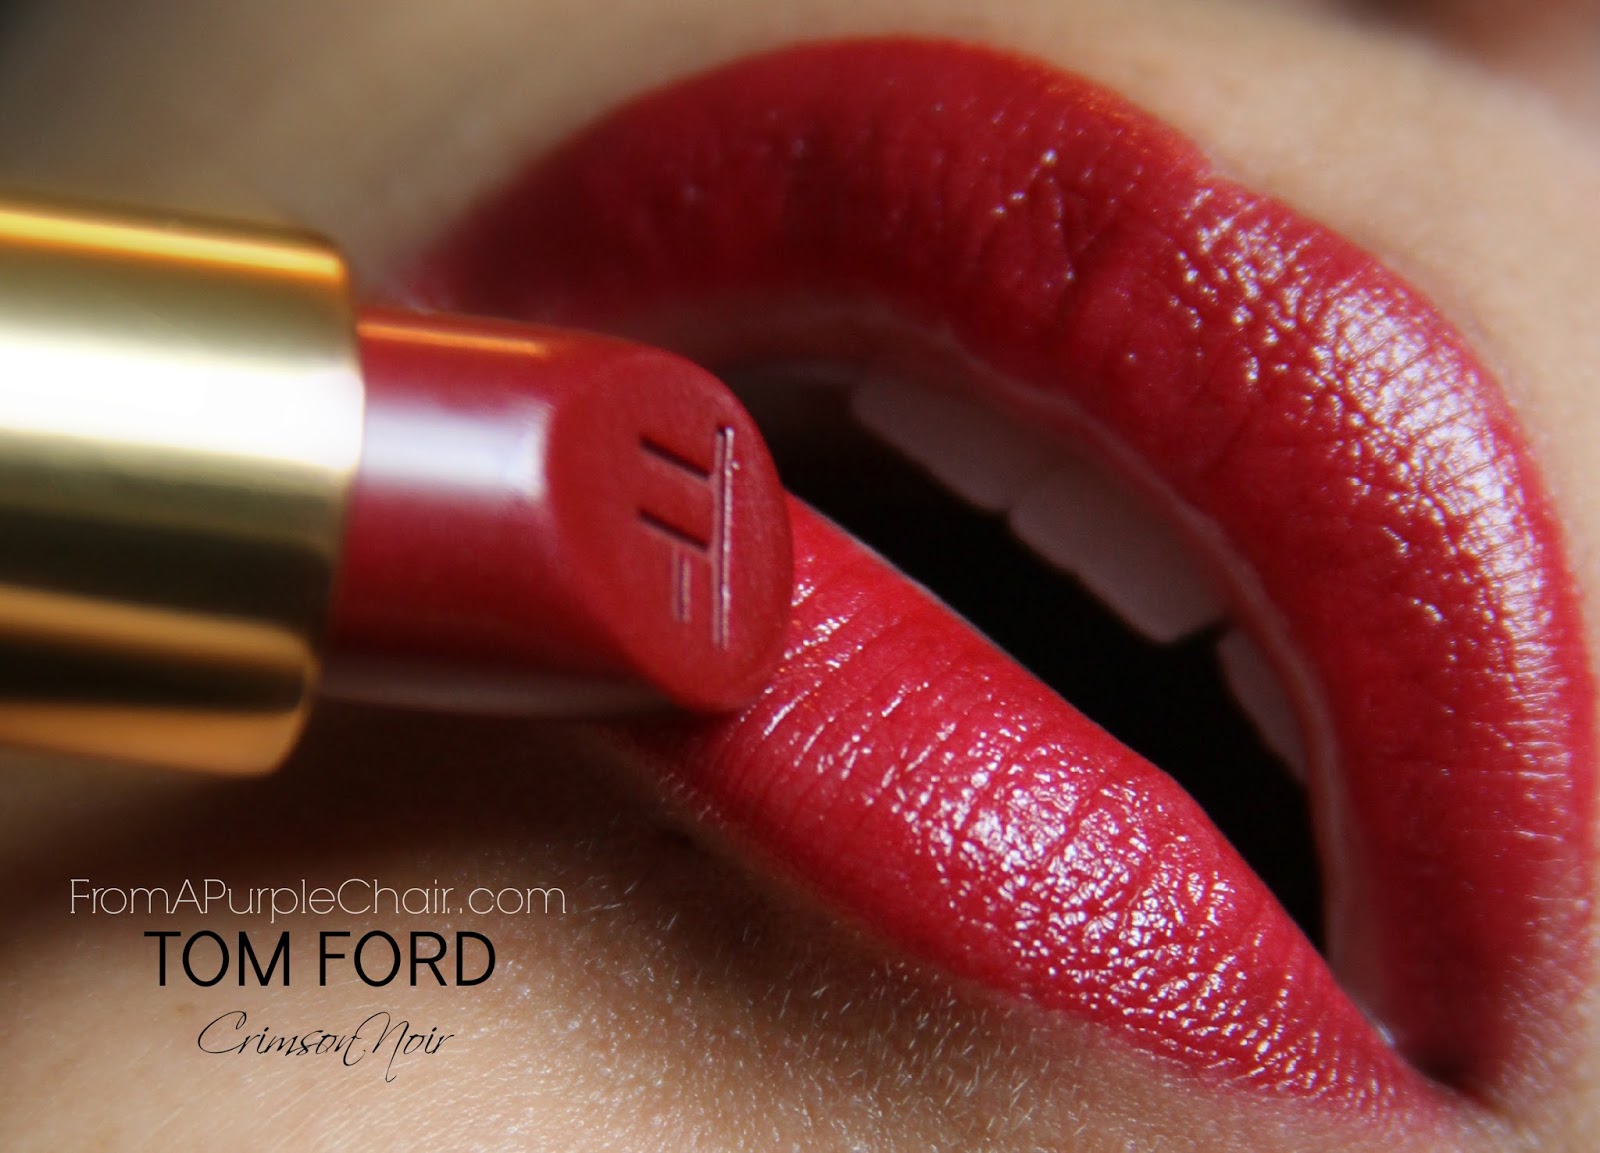 Tom Ford Crimson Noir & Casablanca Review and Swatches - Miss Liz Heart